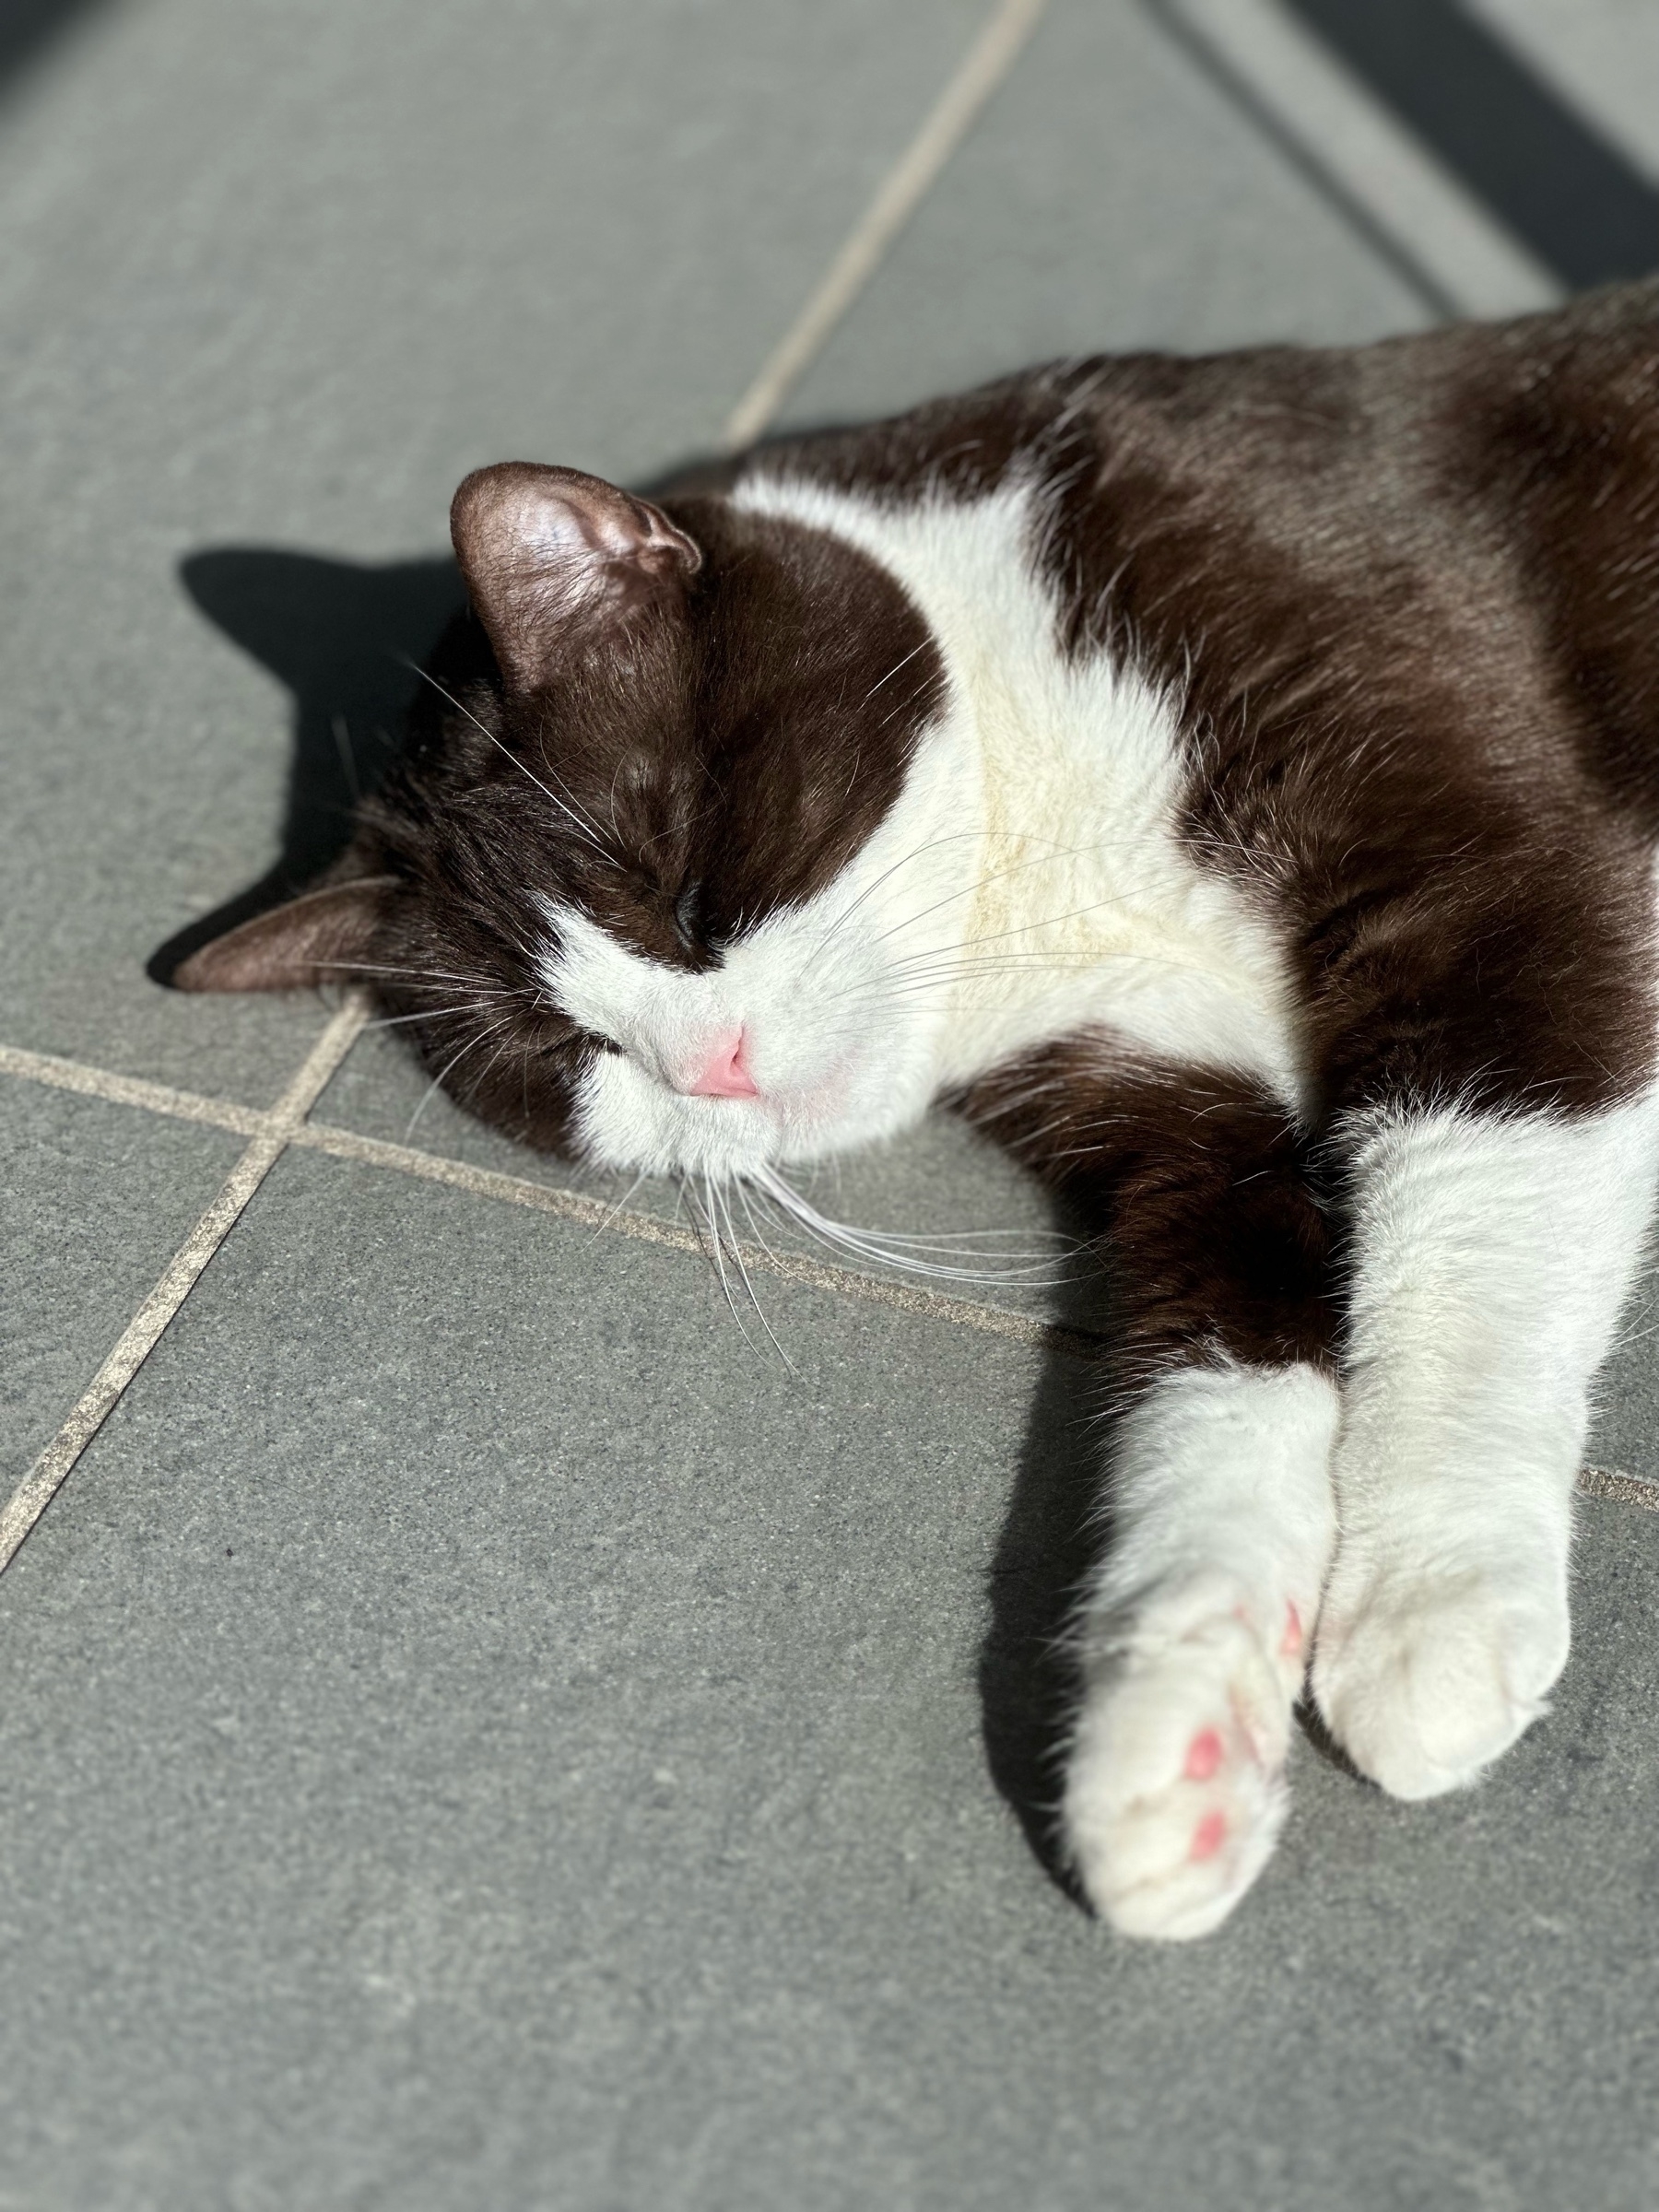 The head of a black and white cat laying on grey tiles. The cat has a black body and head with white nose, under chin and bottom of front paws.